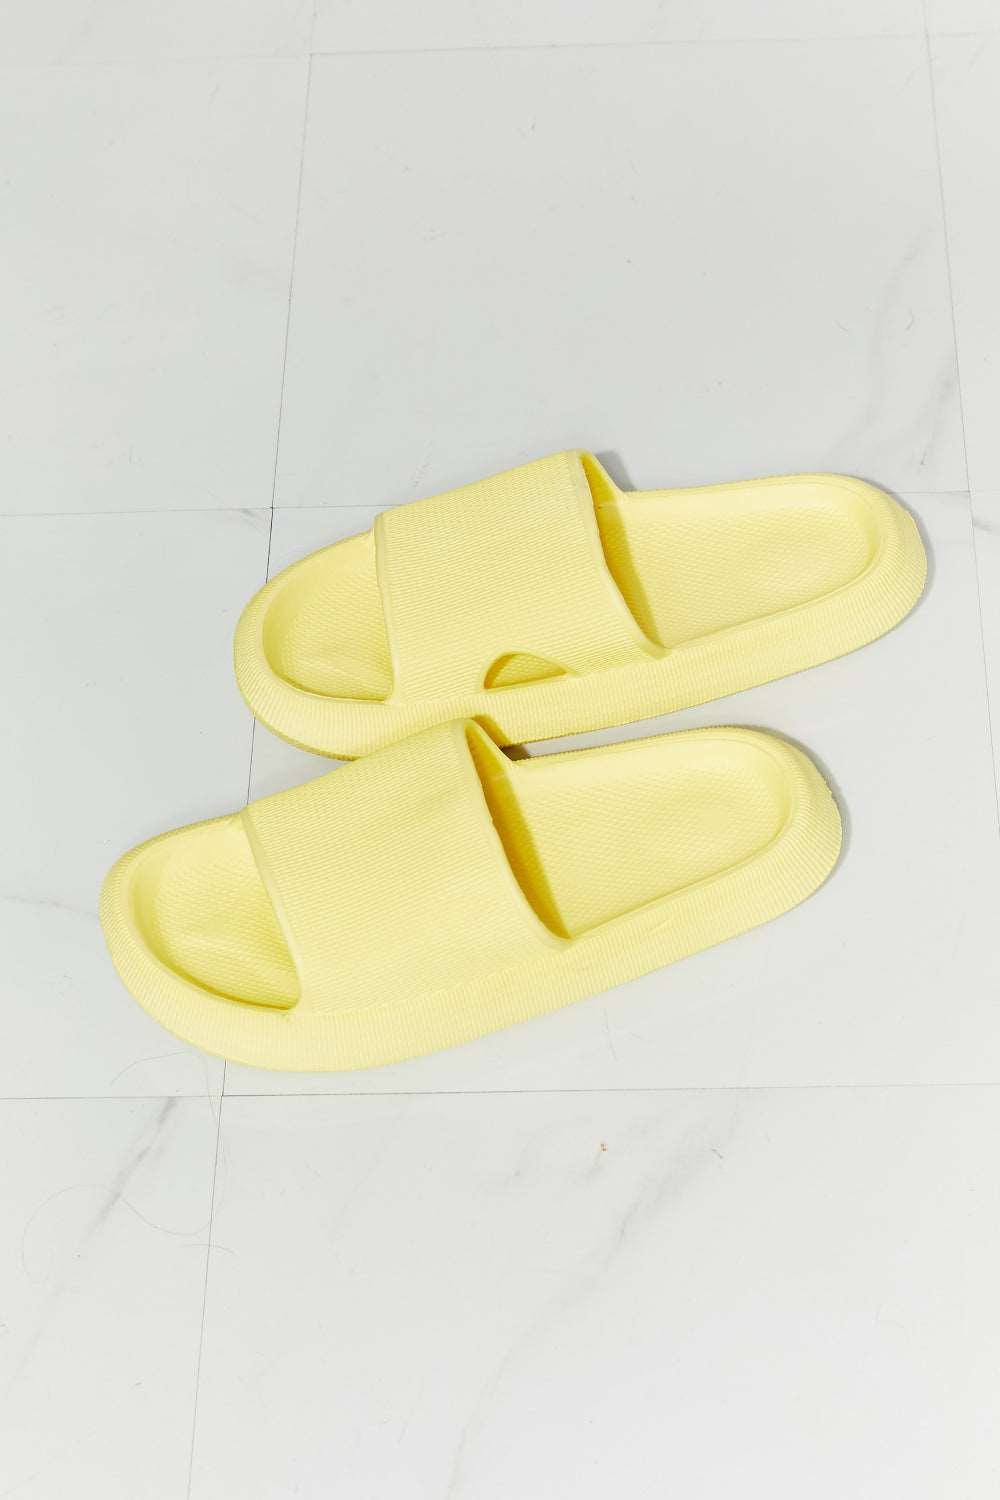 Arms Around Me Open Toe Slide in Yellow - Shop Shea Rock